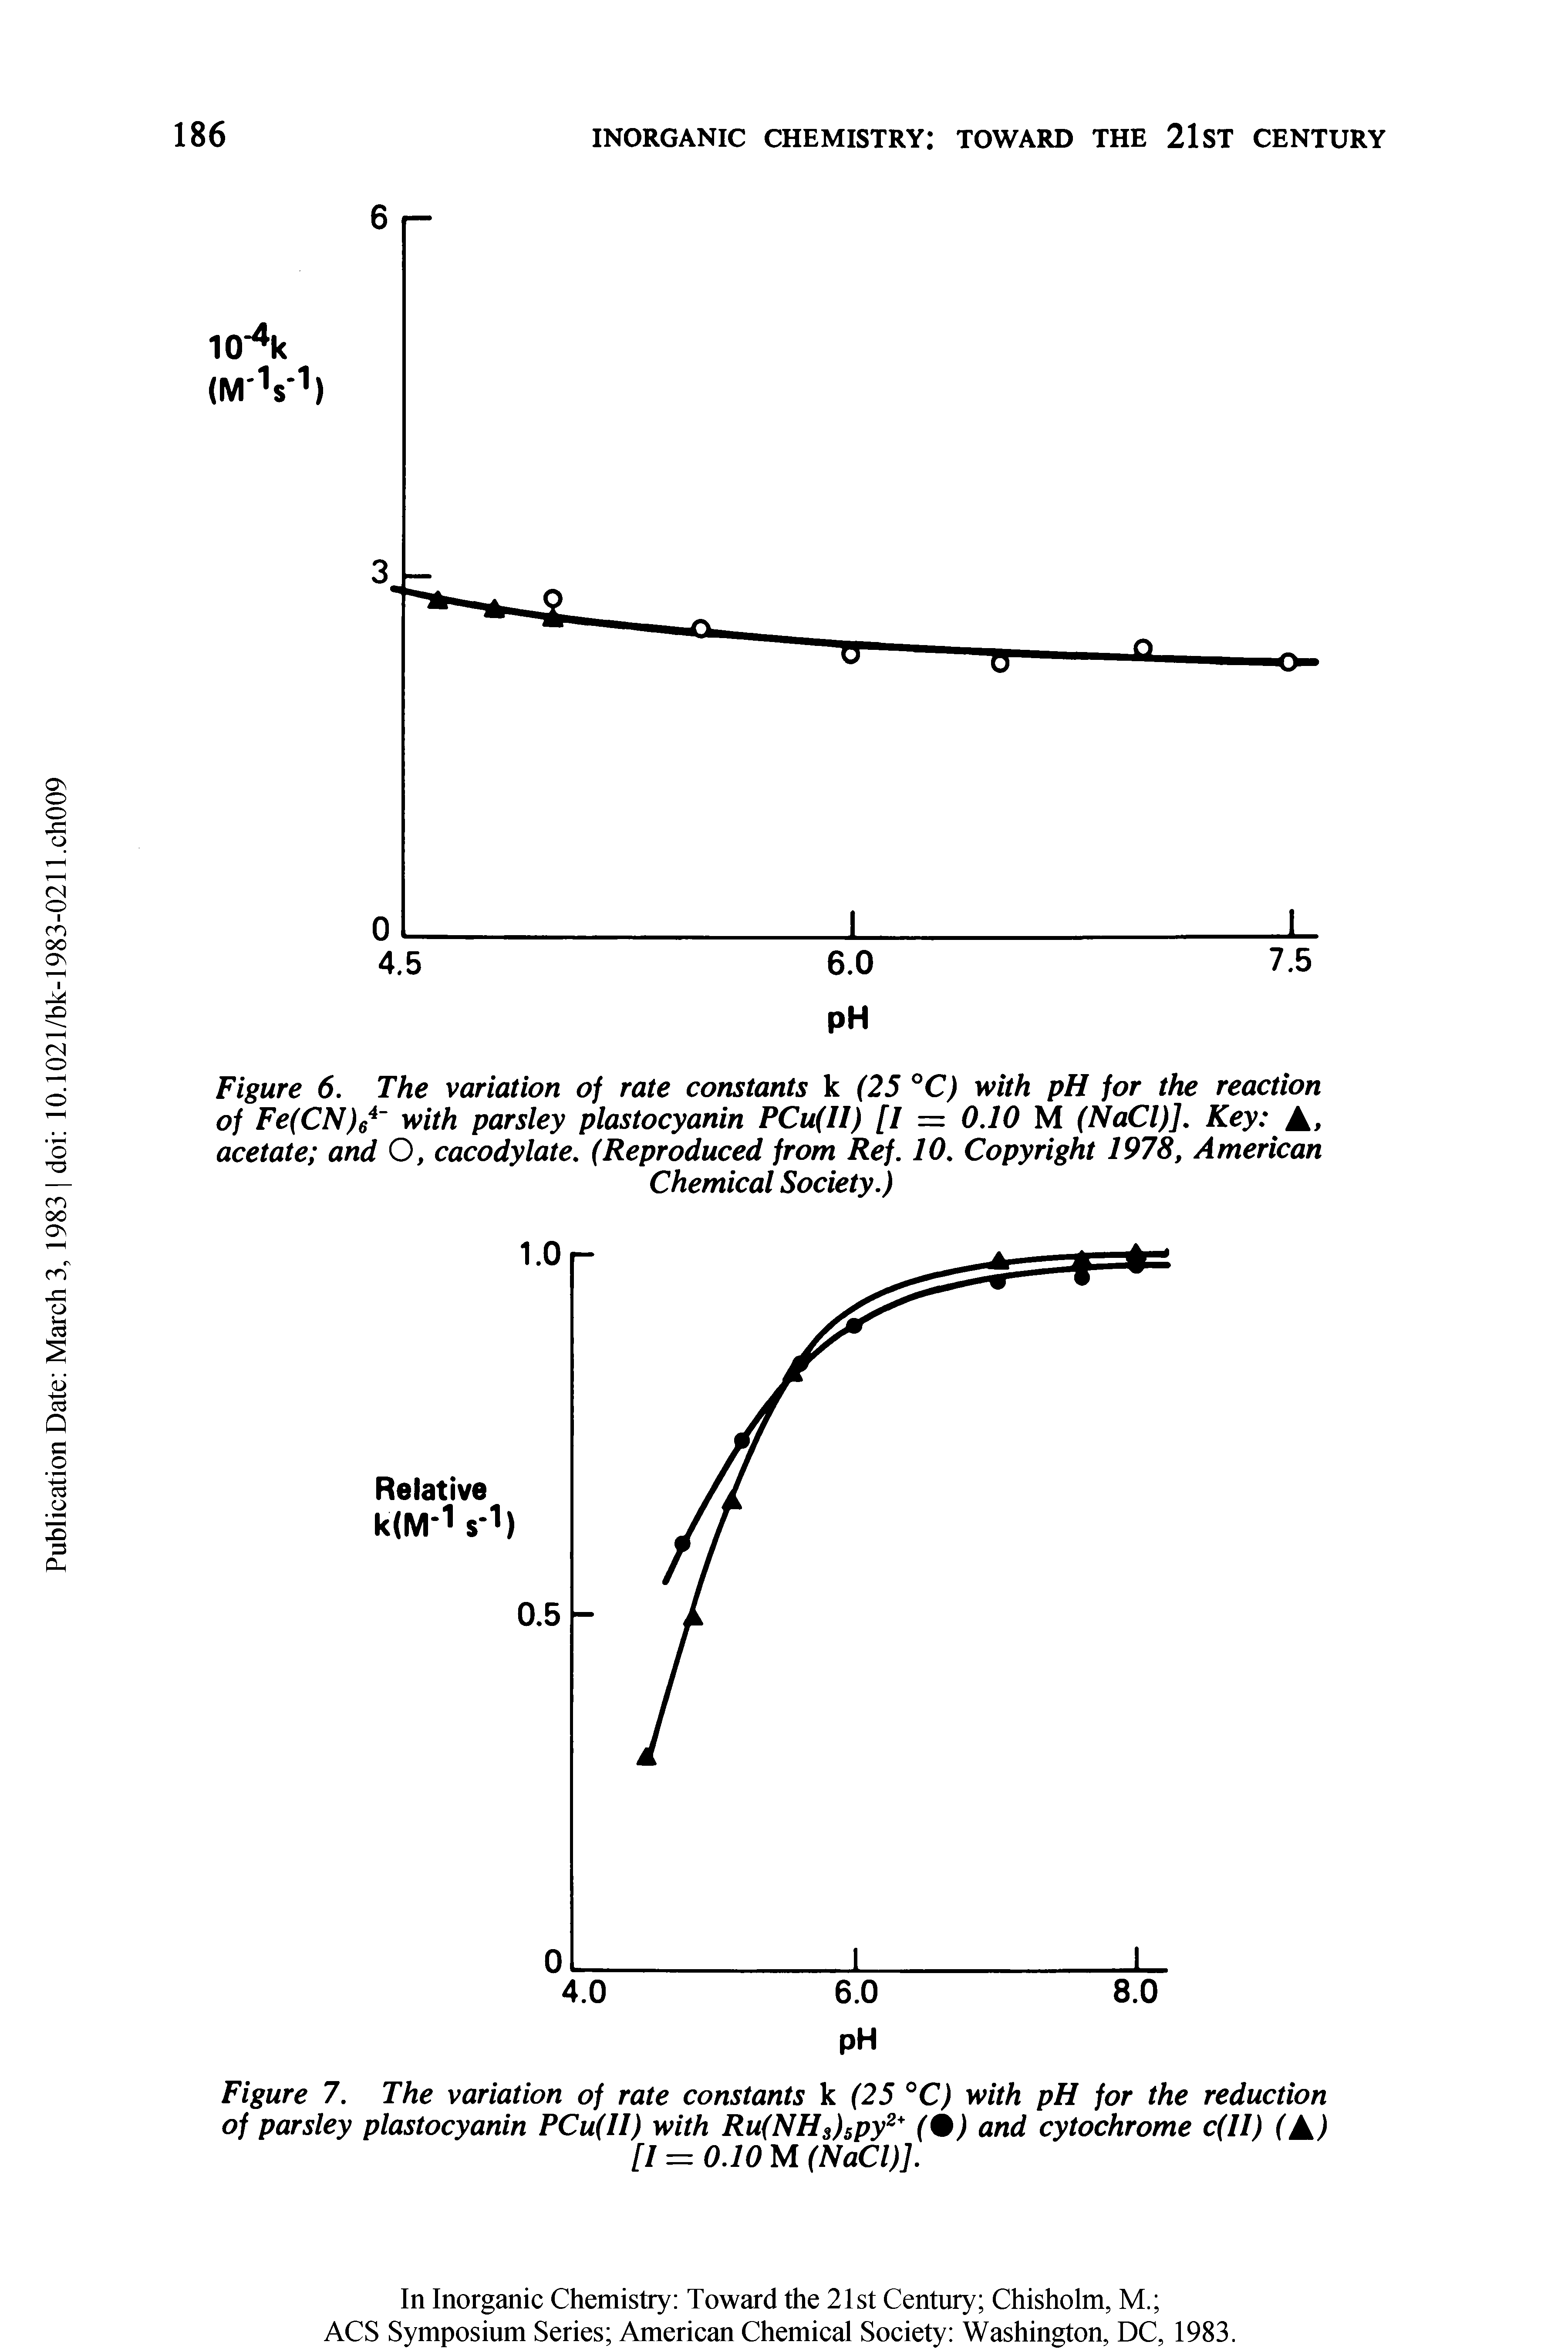 Figure 7. The variation of rate constants k (25 °C) with pH for the reduction of parsley plastocyanin PCu(II) with Ru(NH3)5py2+ (%) and cytochrome c(II) (A)...